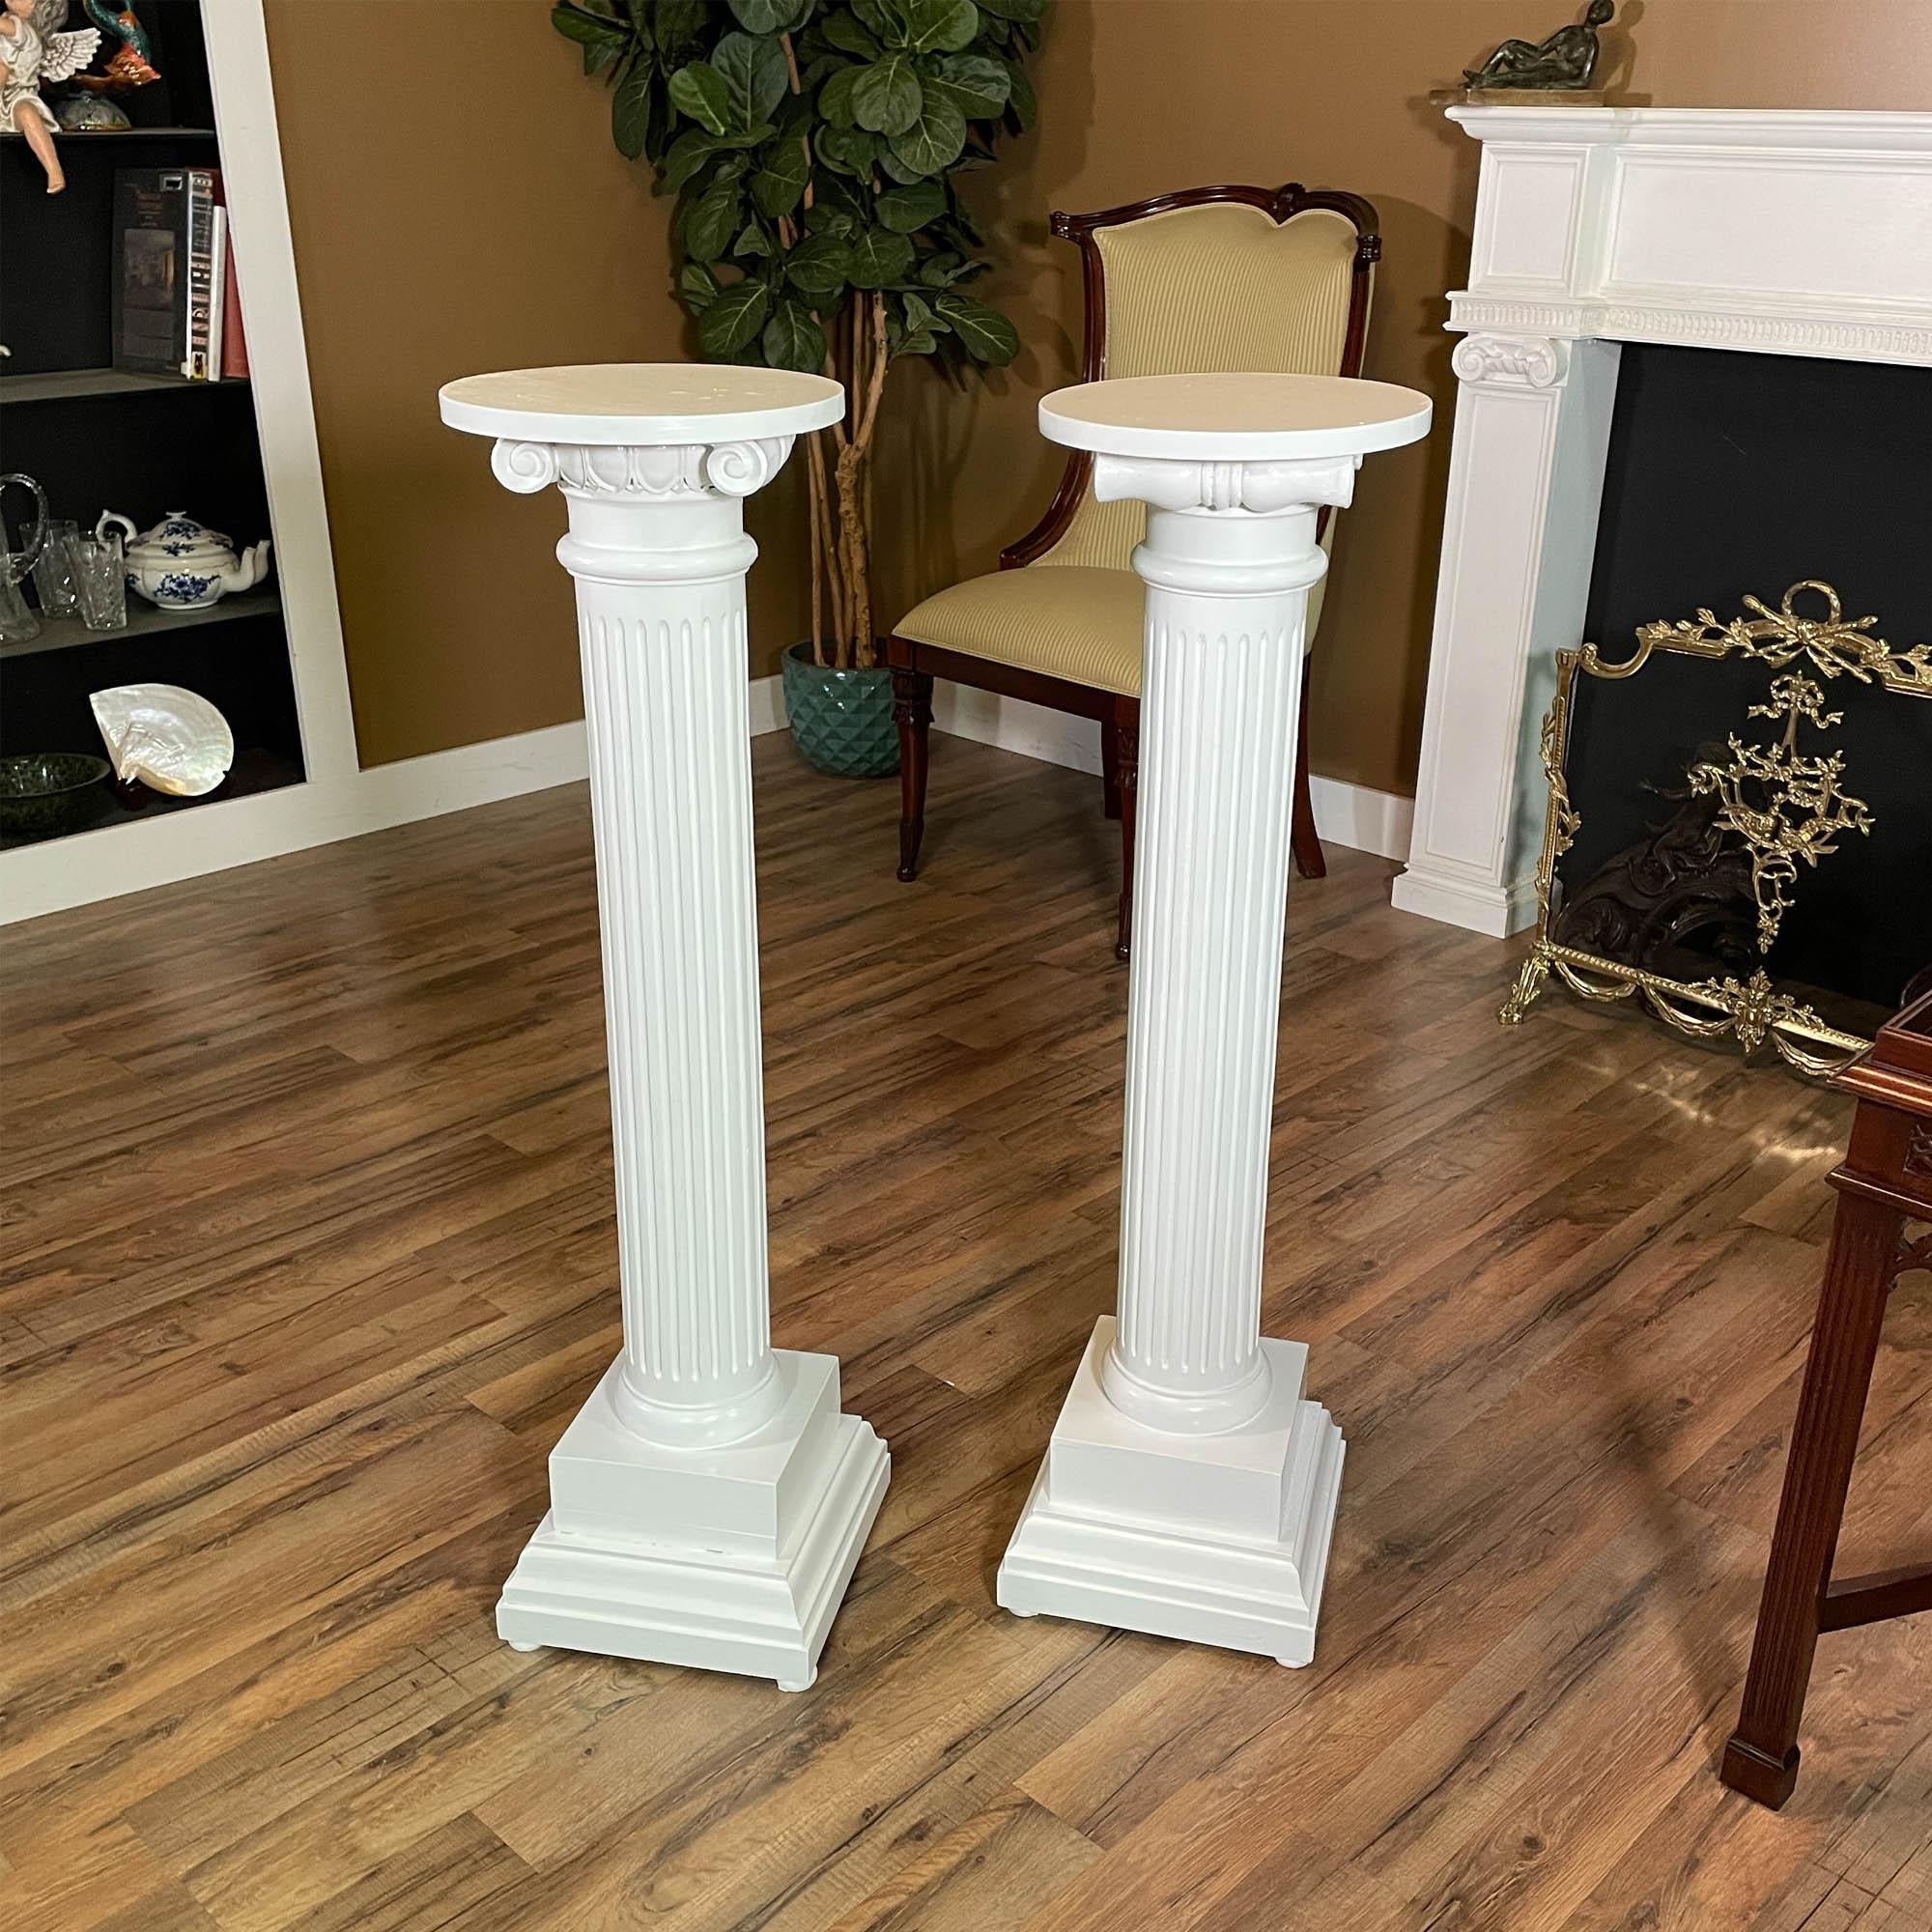 A PAIR Antique Corinthian Pedestals featuring beautifully detailed carving and fluting. Created more than 100 years ago these pieces have withstood the test of time in structurally good condition and have recently been painted to give them a fresh